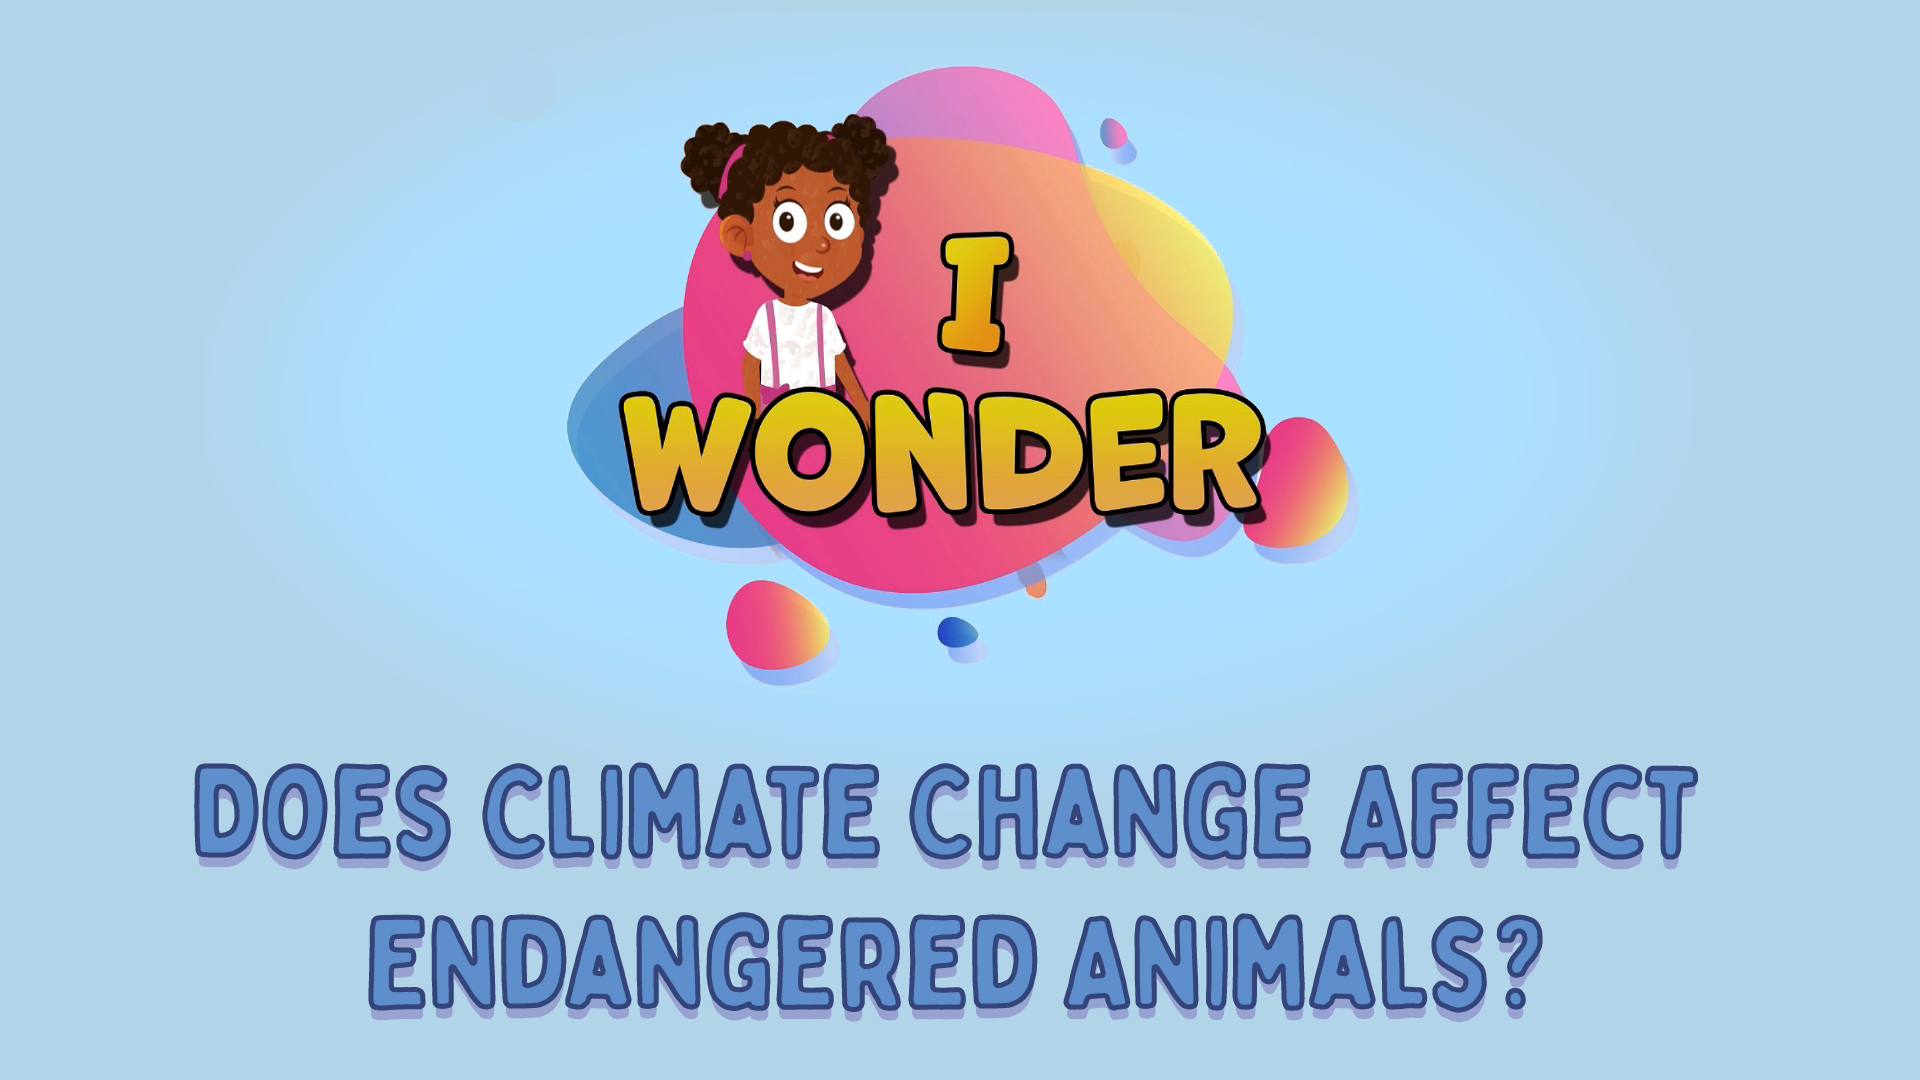 Does Climate Change Affect Endangered Animals?